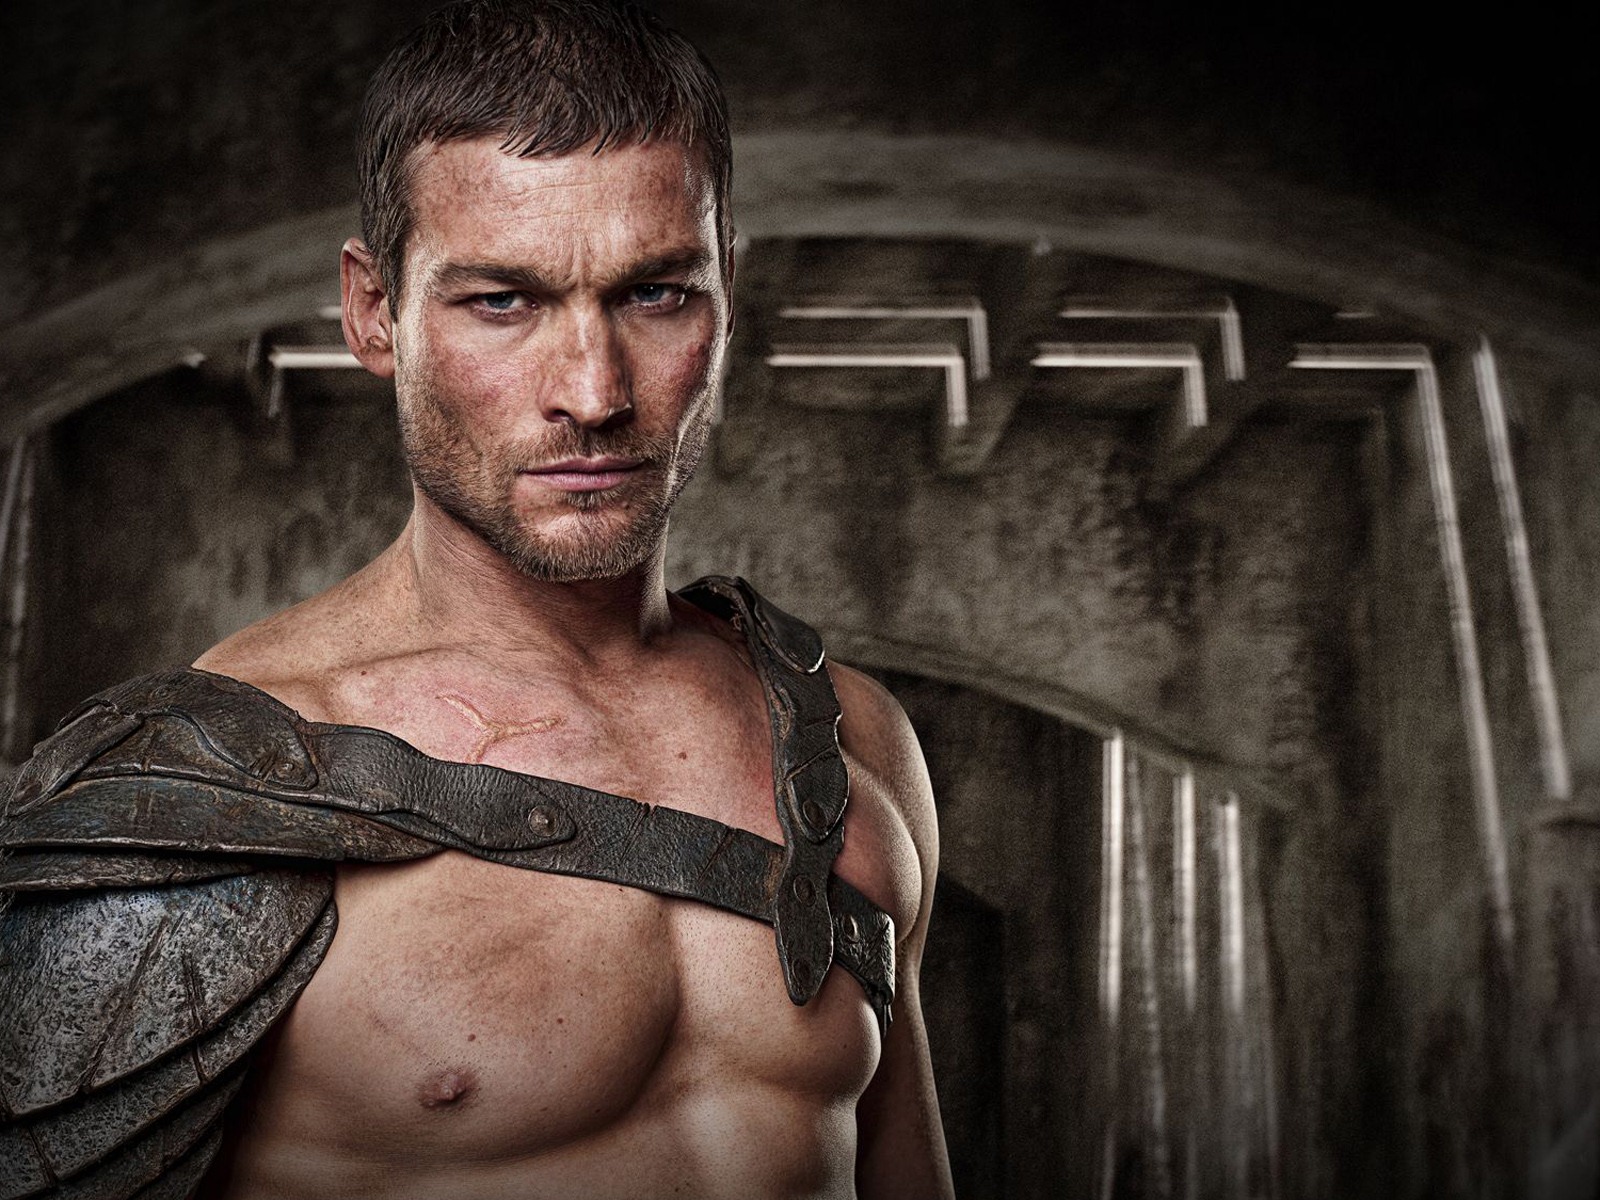 Spartacus: Blood and Sand HD Wallpaper #15 - 1600x1200